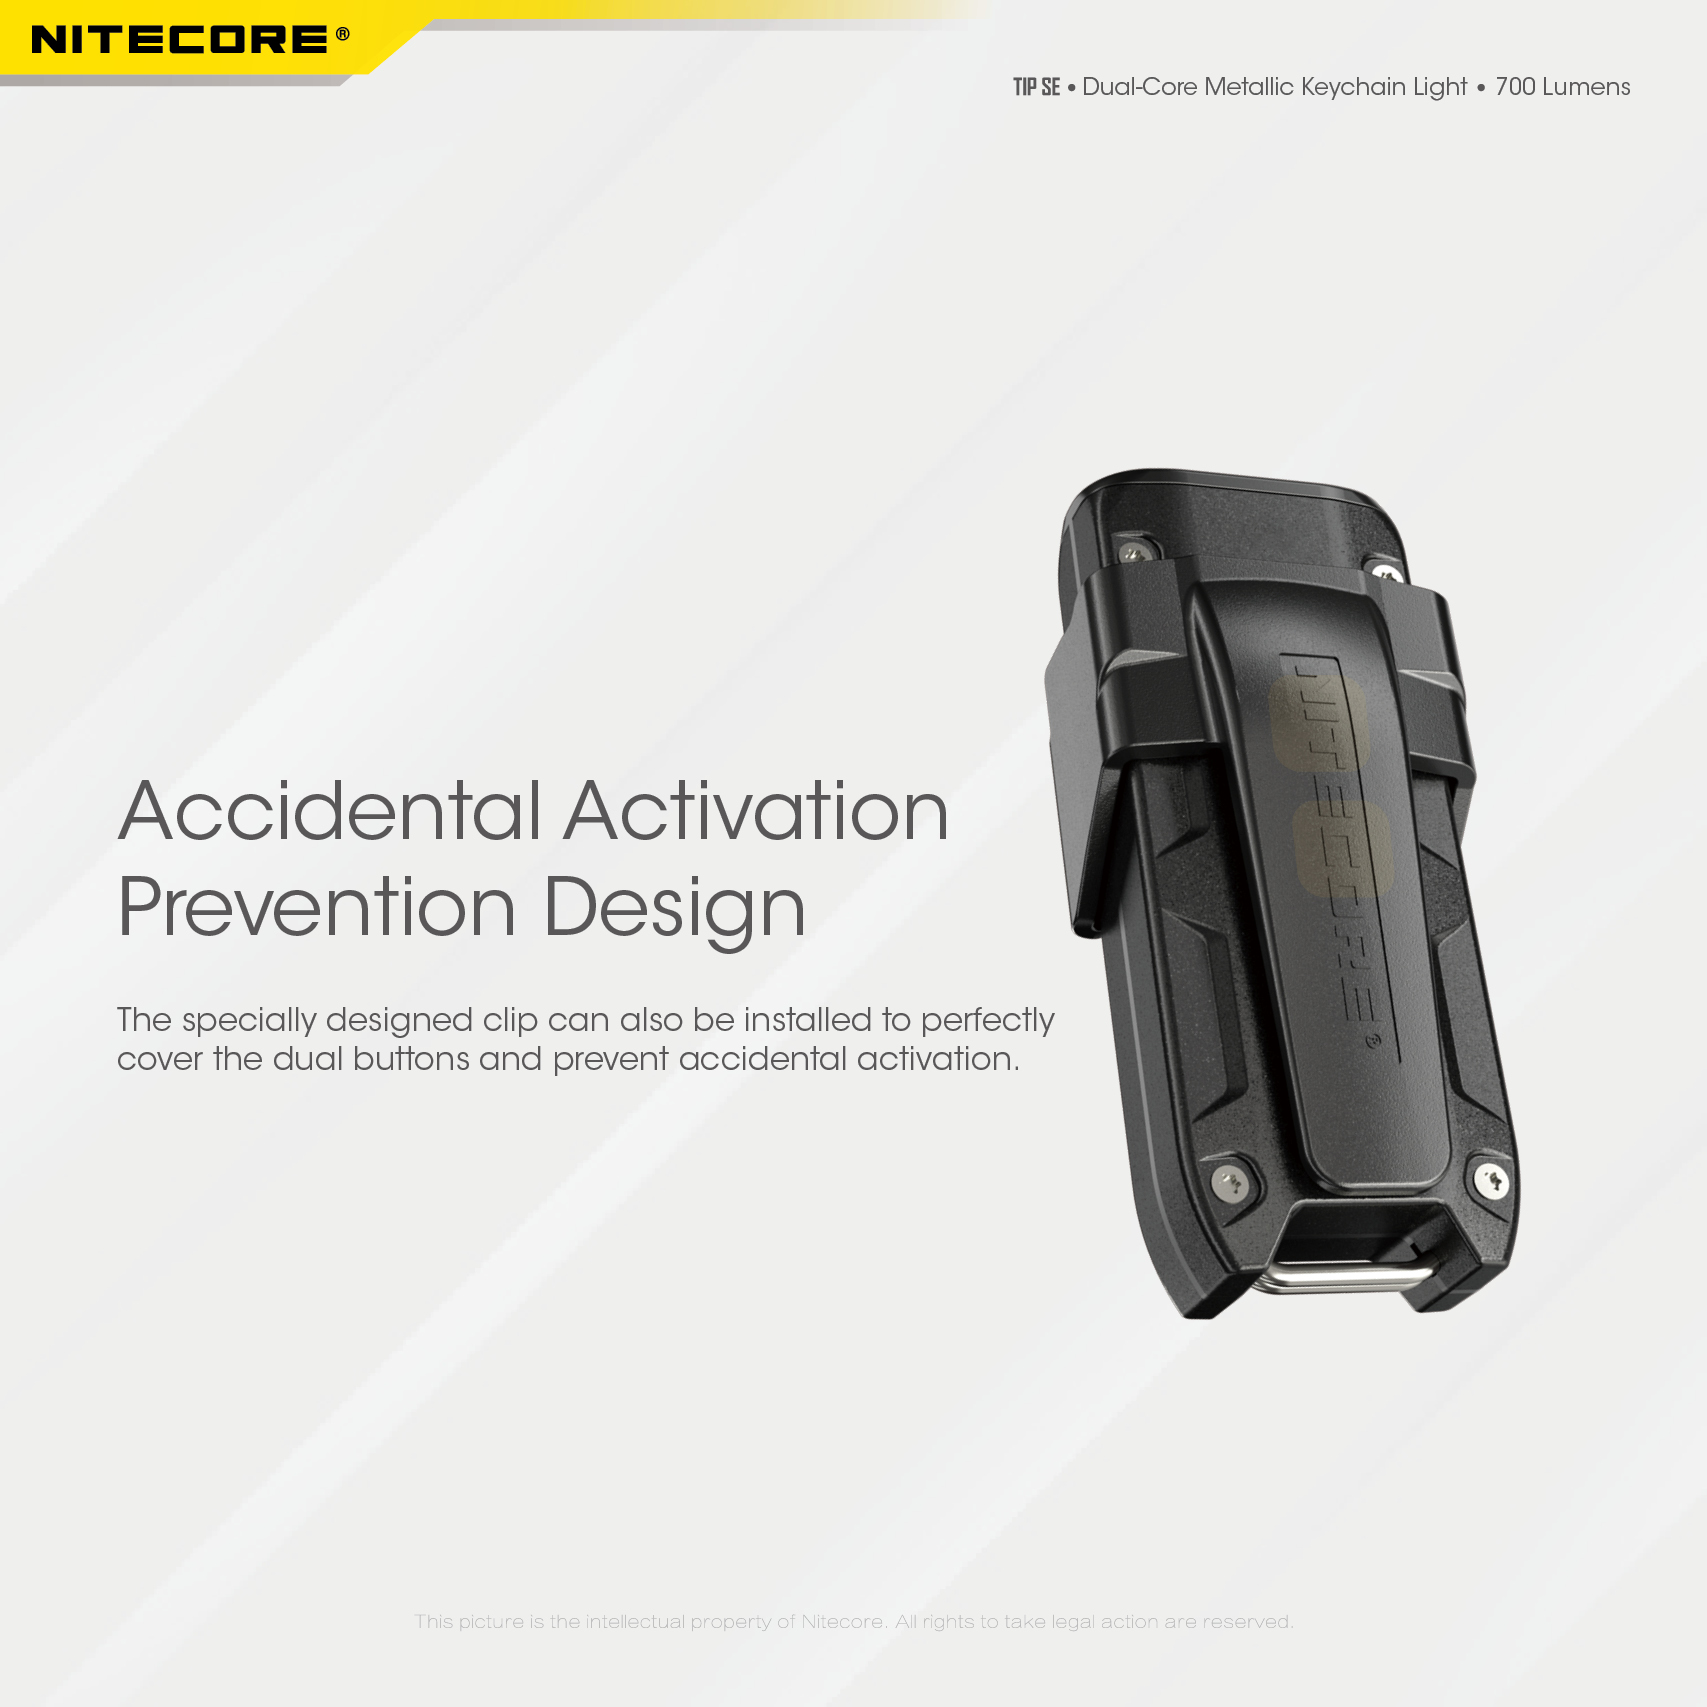 NITECORE-TIP-SE-700LM-P8-Dual-Light-LED-Keychain-Flashlight-Type-C-Rechargeable-QC-Every-Day-Carry-M-1976045-17